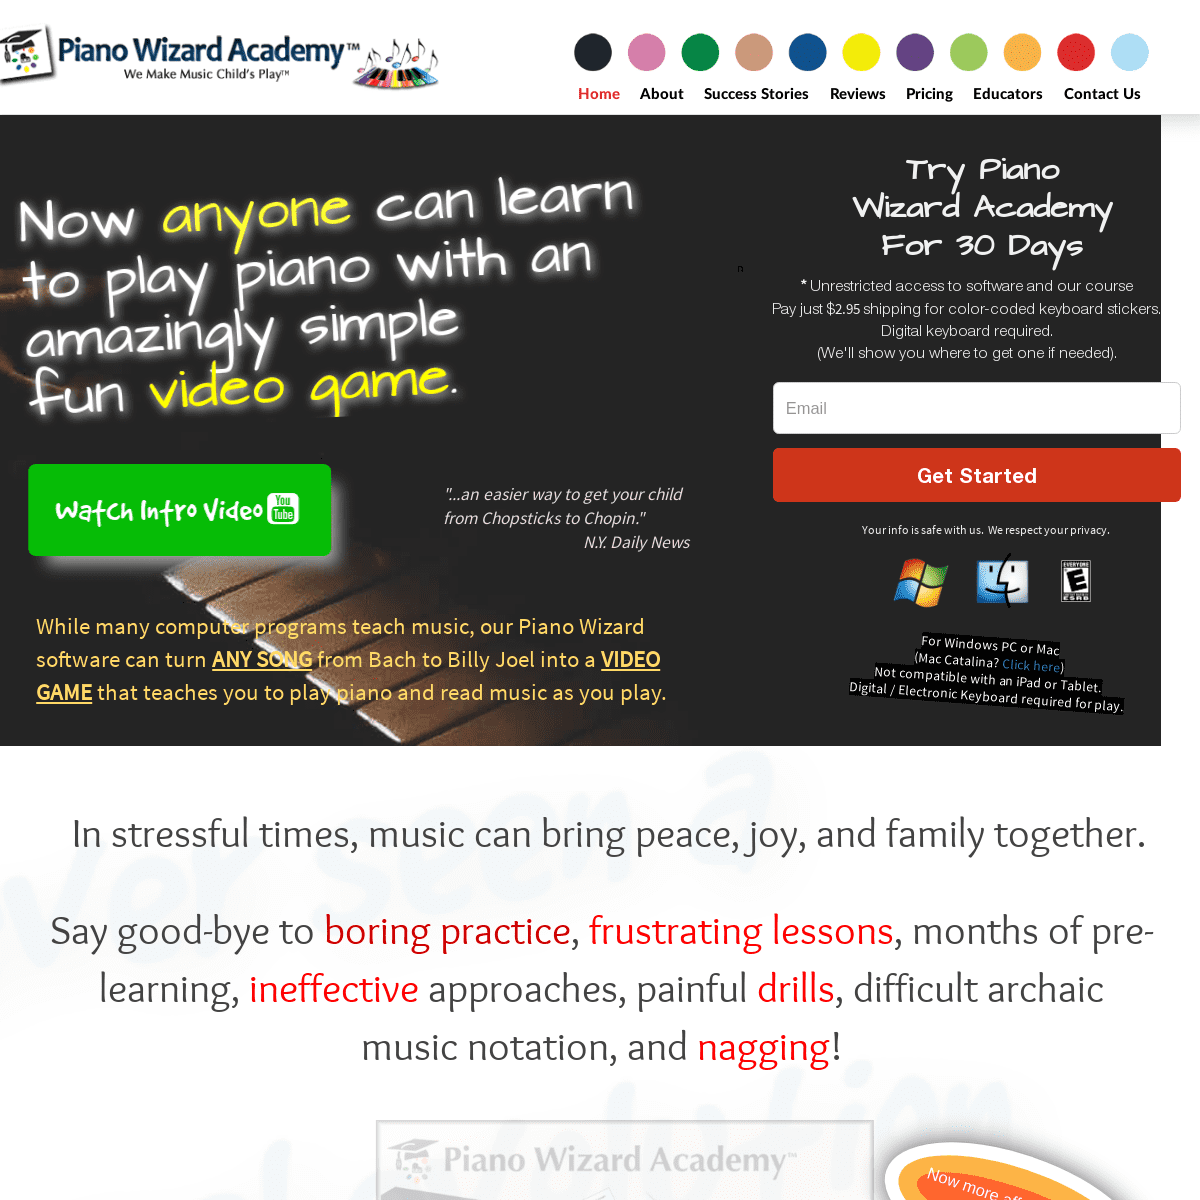 A complete backup of pianowizardacademy.com